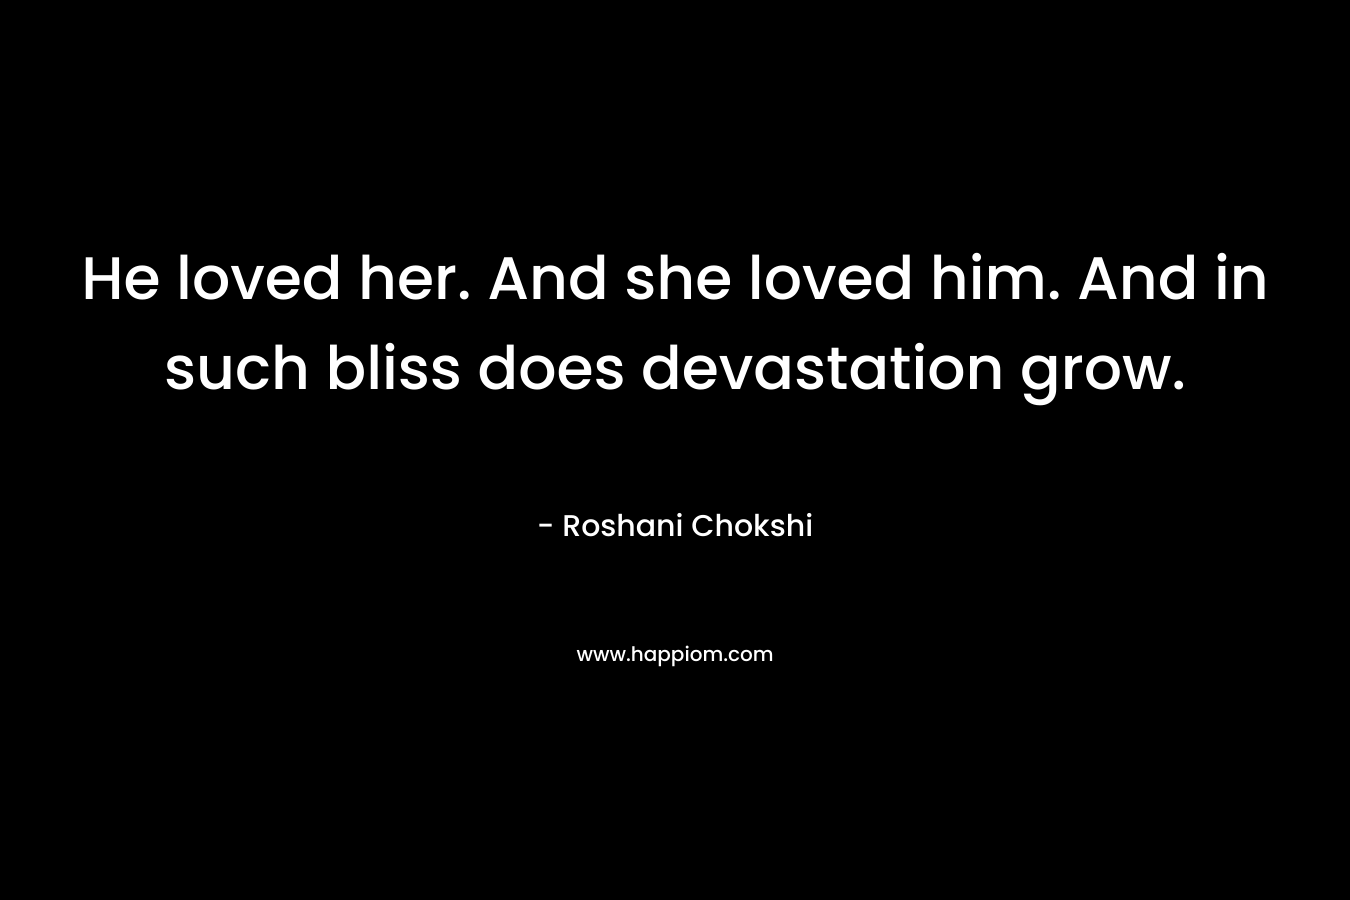 He loved her. And she loved him. And in such bliss does devastation grow. – Roshani Chokshi